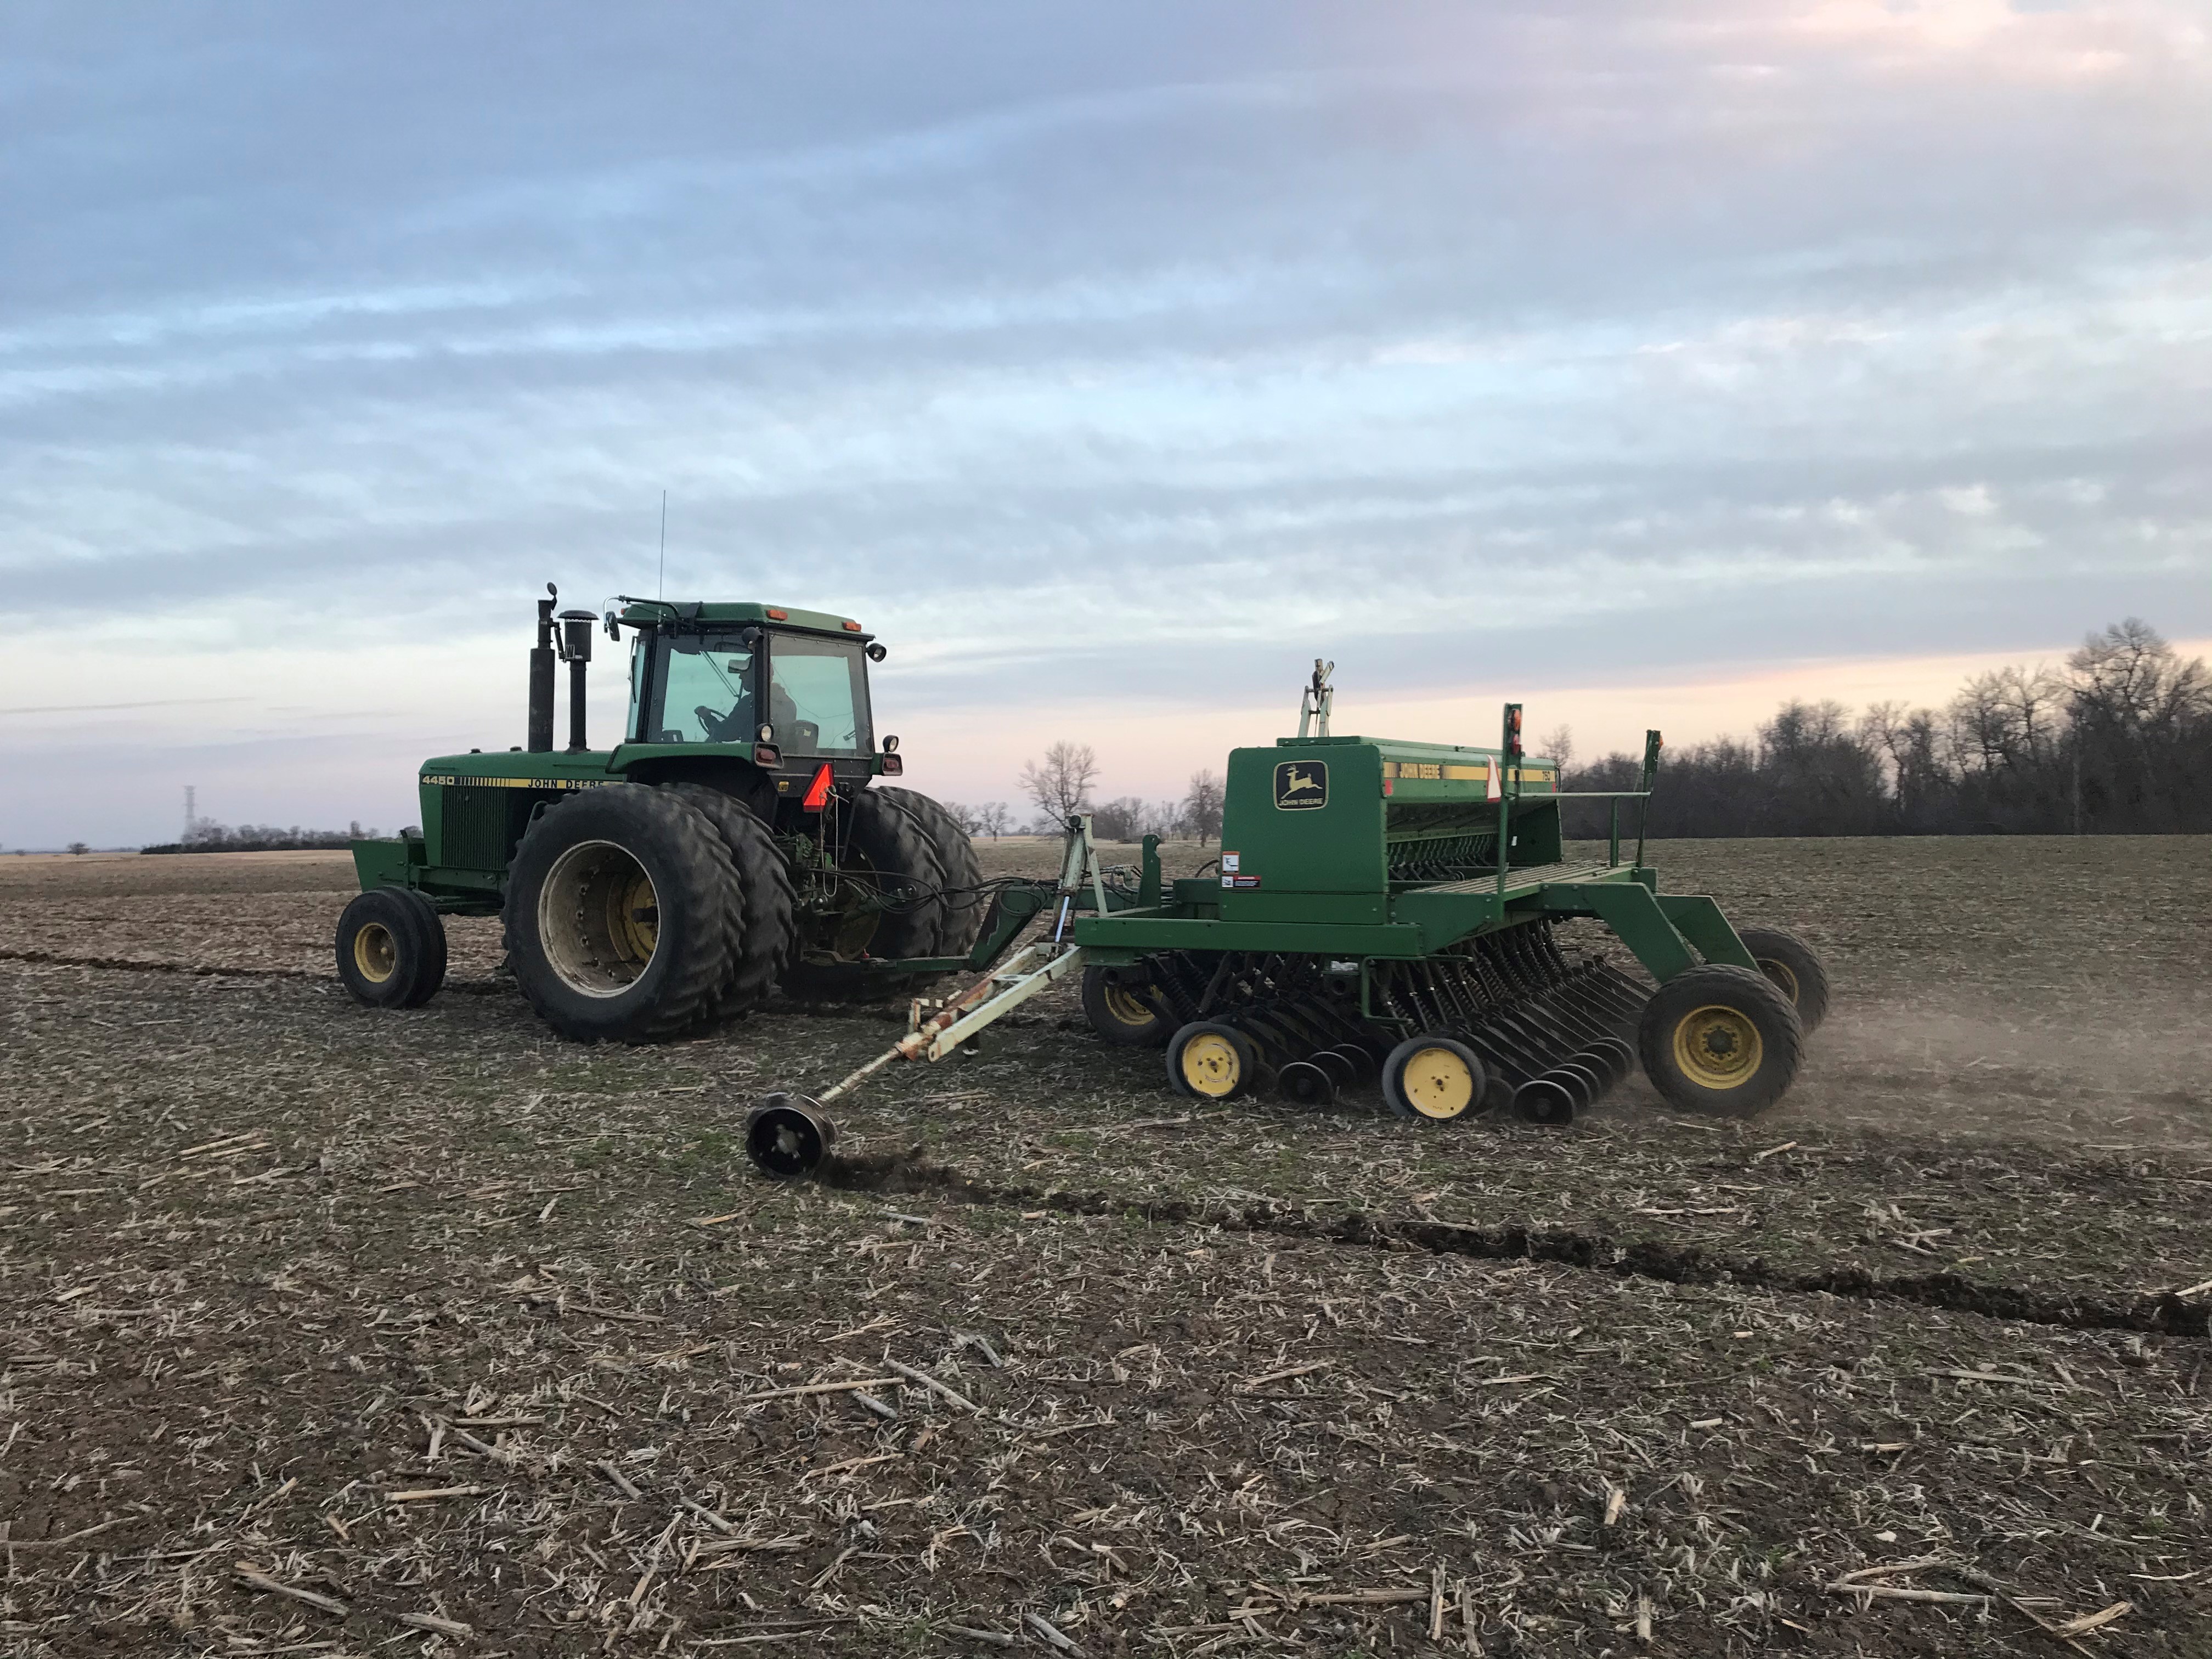 A green tractor pulls a planter to plant oats in a field